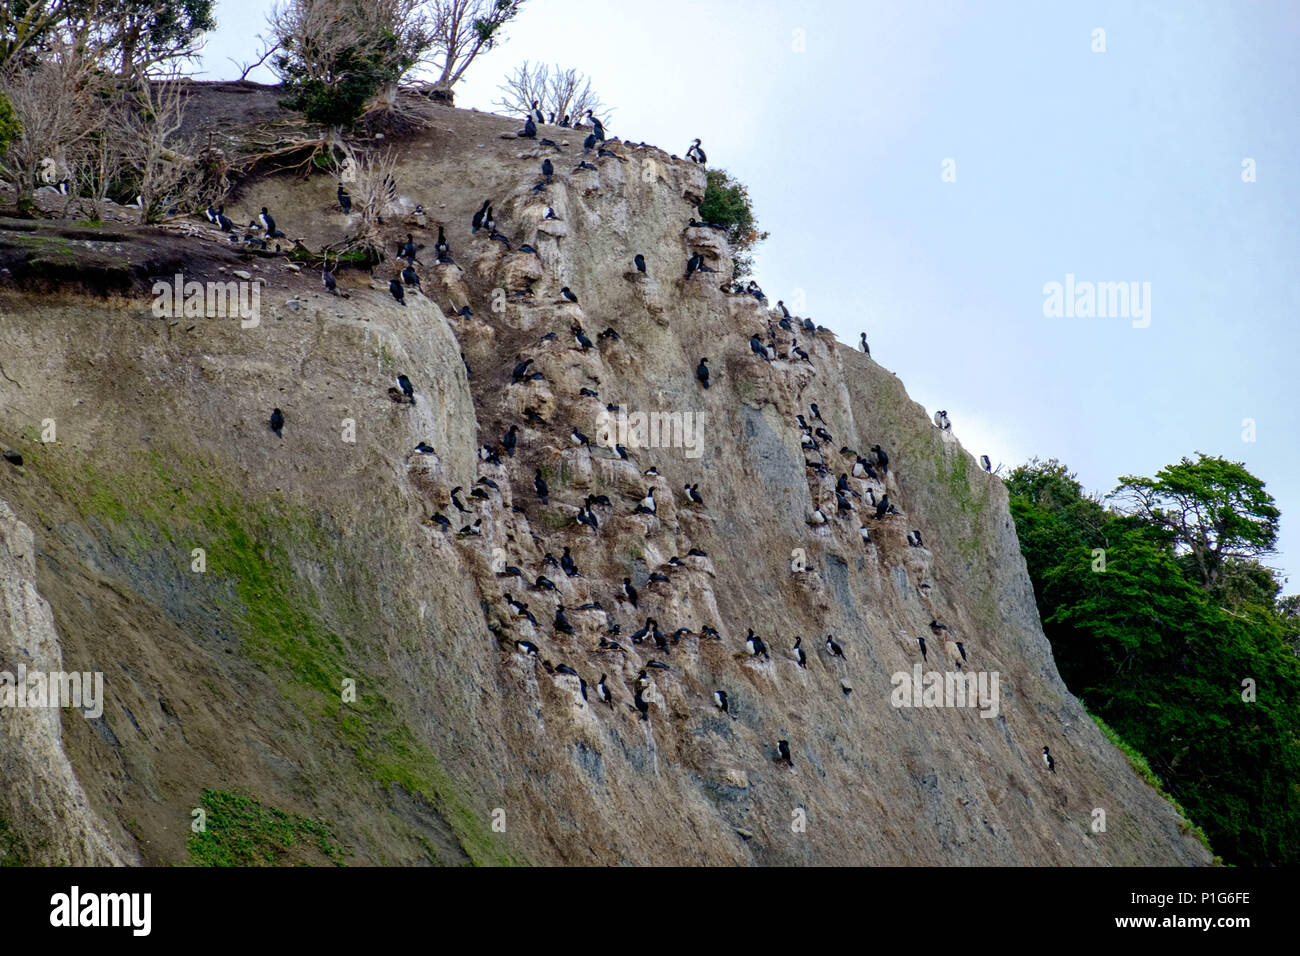 Nests of a colony of rock shags on a cliff on an island in the Beagle Channel. Stock Photo